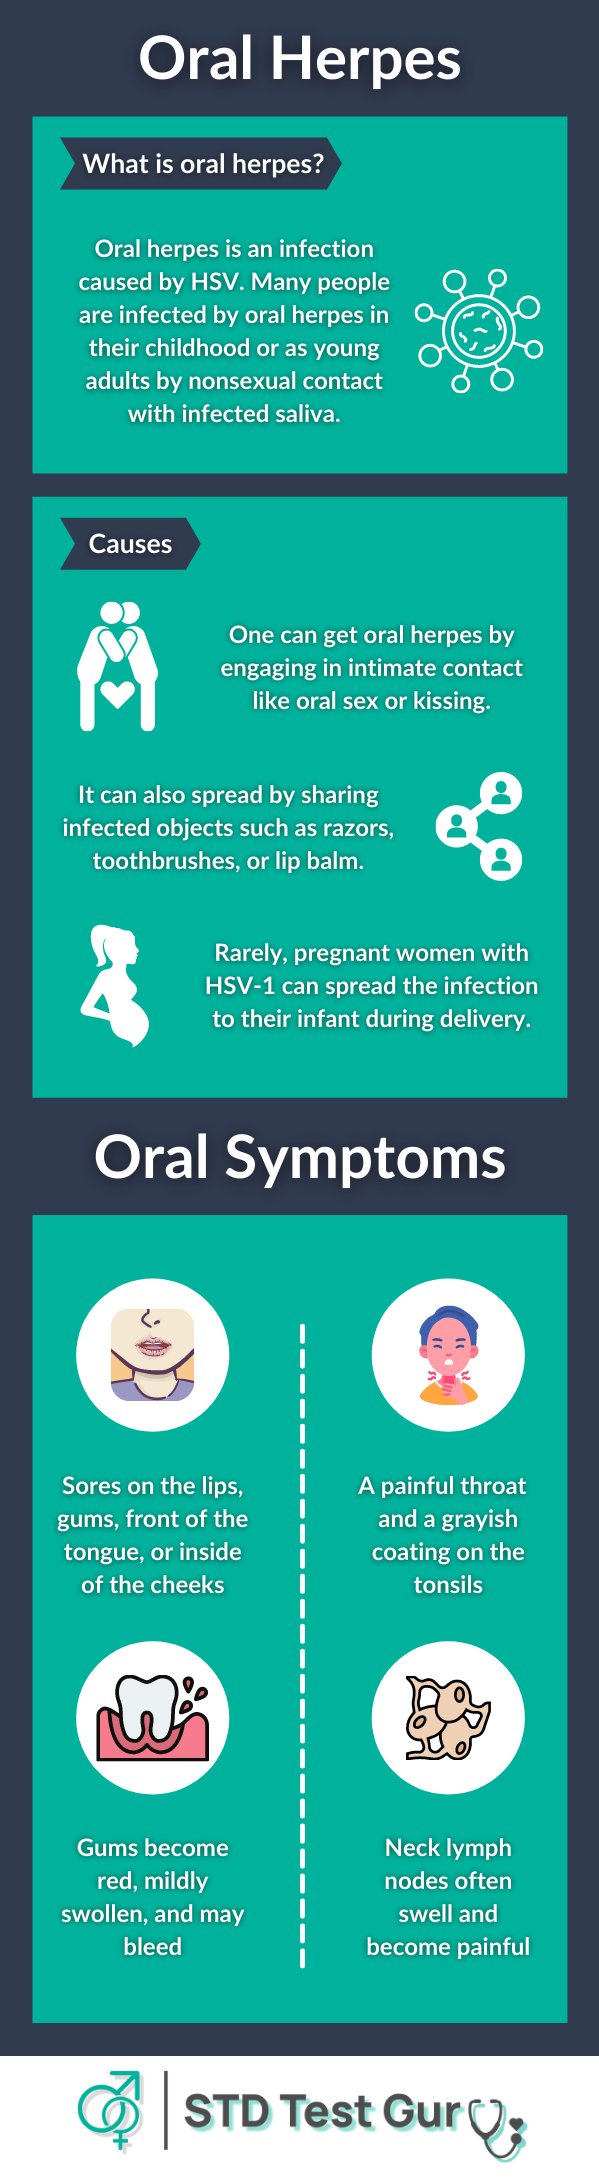 Oral Herpes: Causes and Symptoms